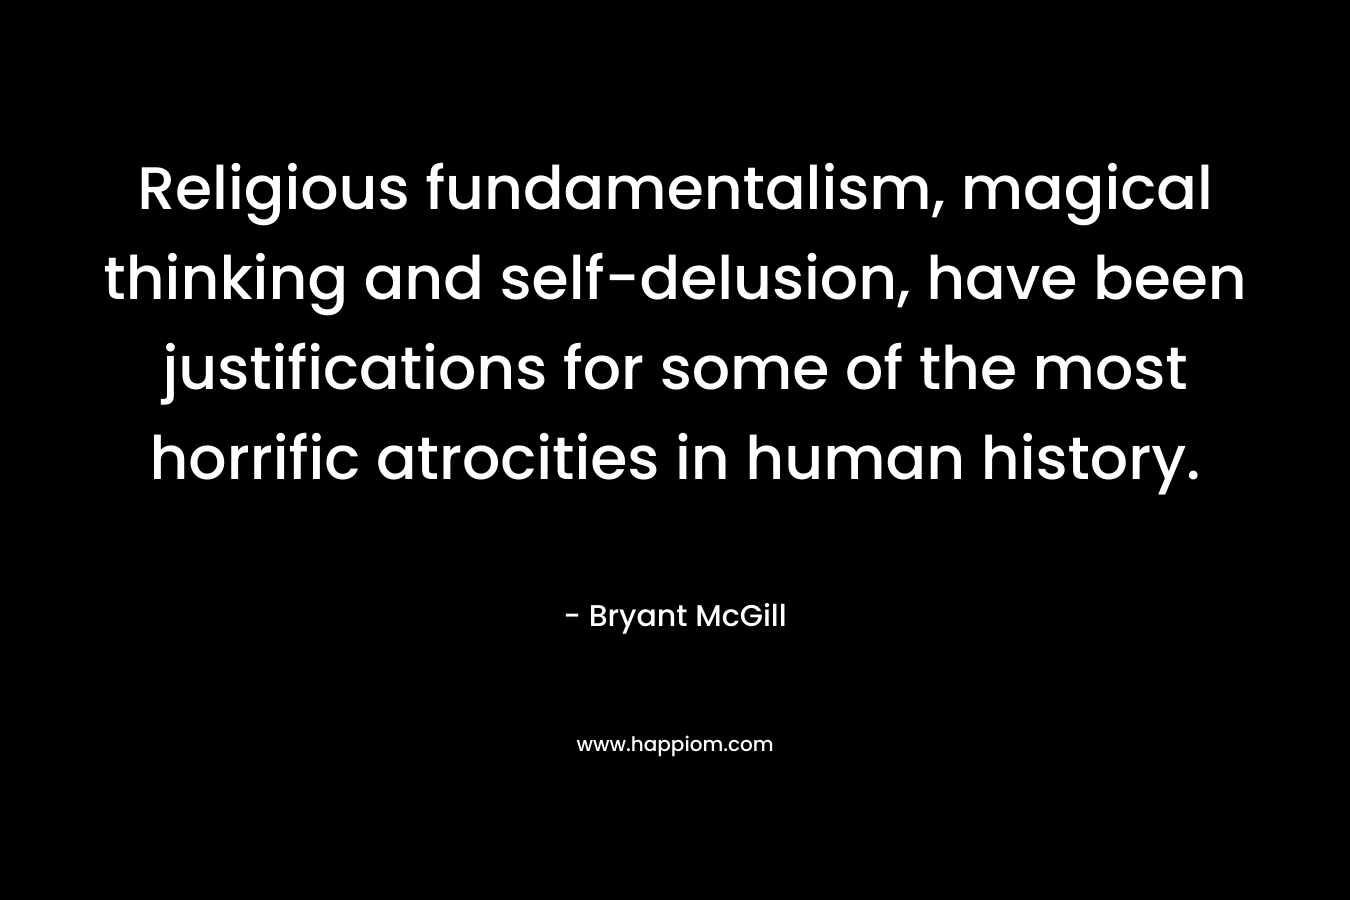 Religious fundamentalism, magical thinking and self-delusion, have been justifications for some of the most horrific atrocities in human history. – Bryant McGill